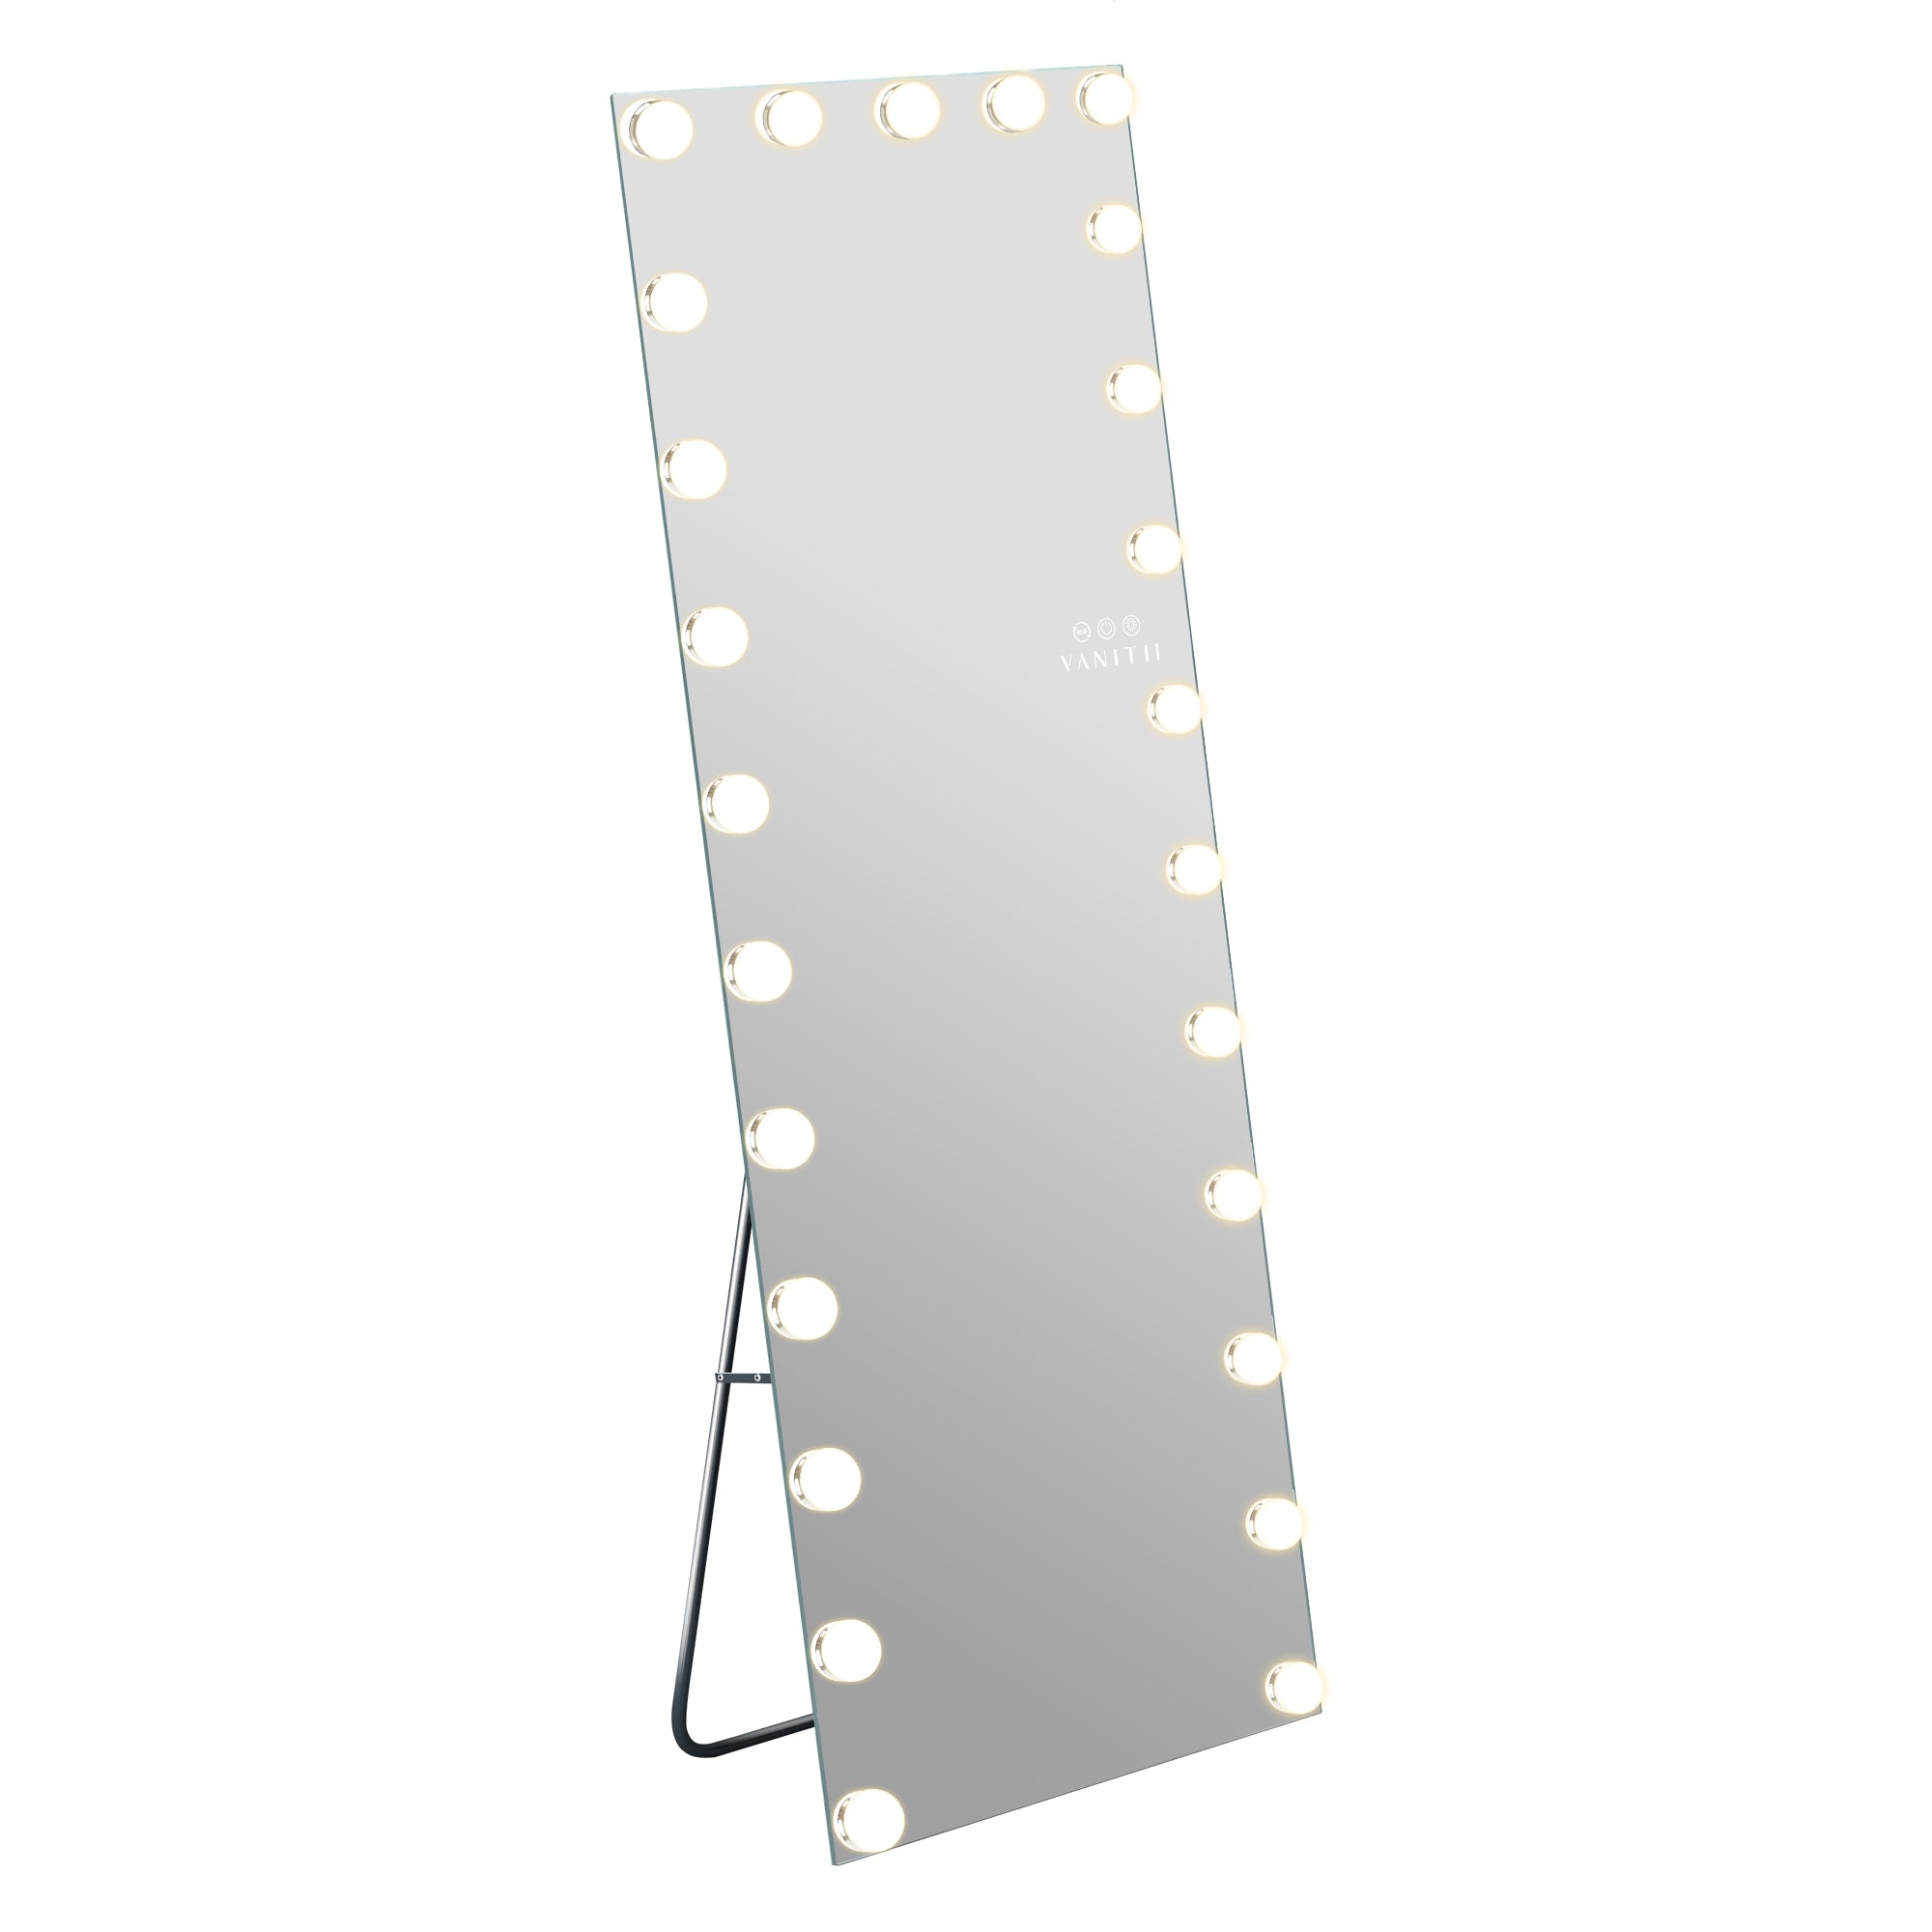 VANITII Hollywood Vanity Mirror - Full Length Vanity Mirror with 25 Dimmable LED Bulbs and RGB